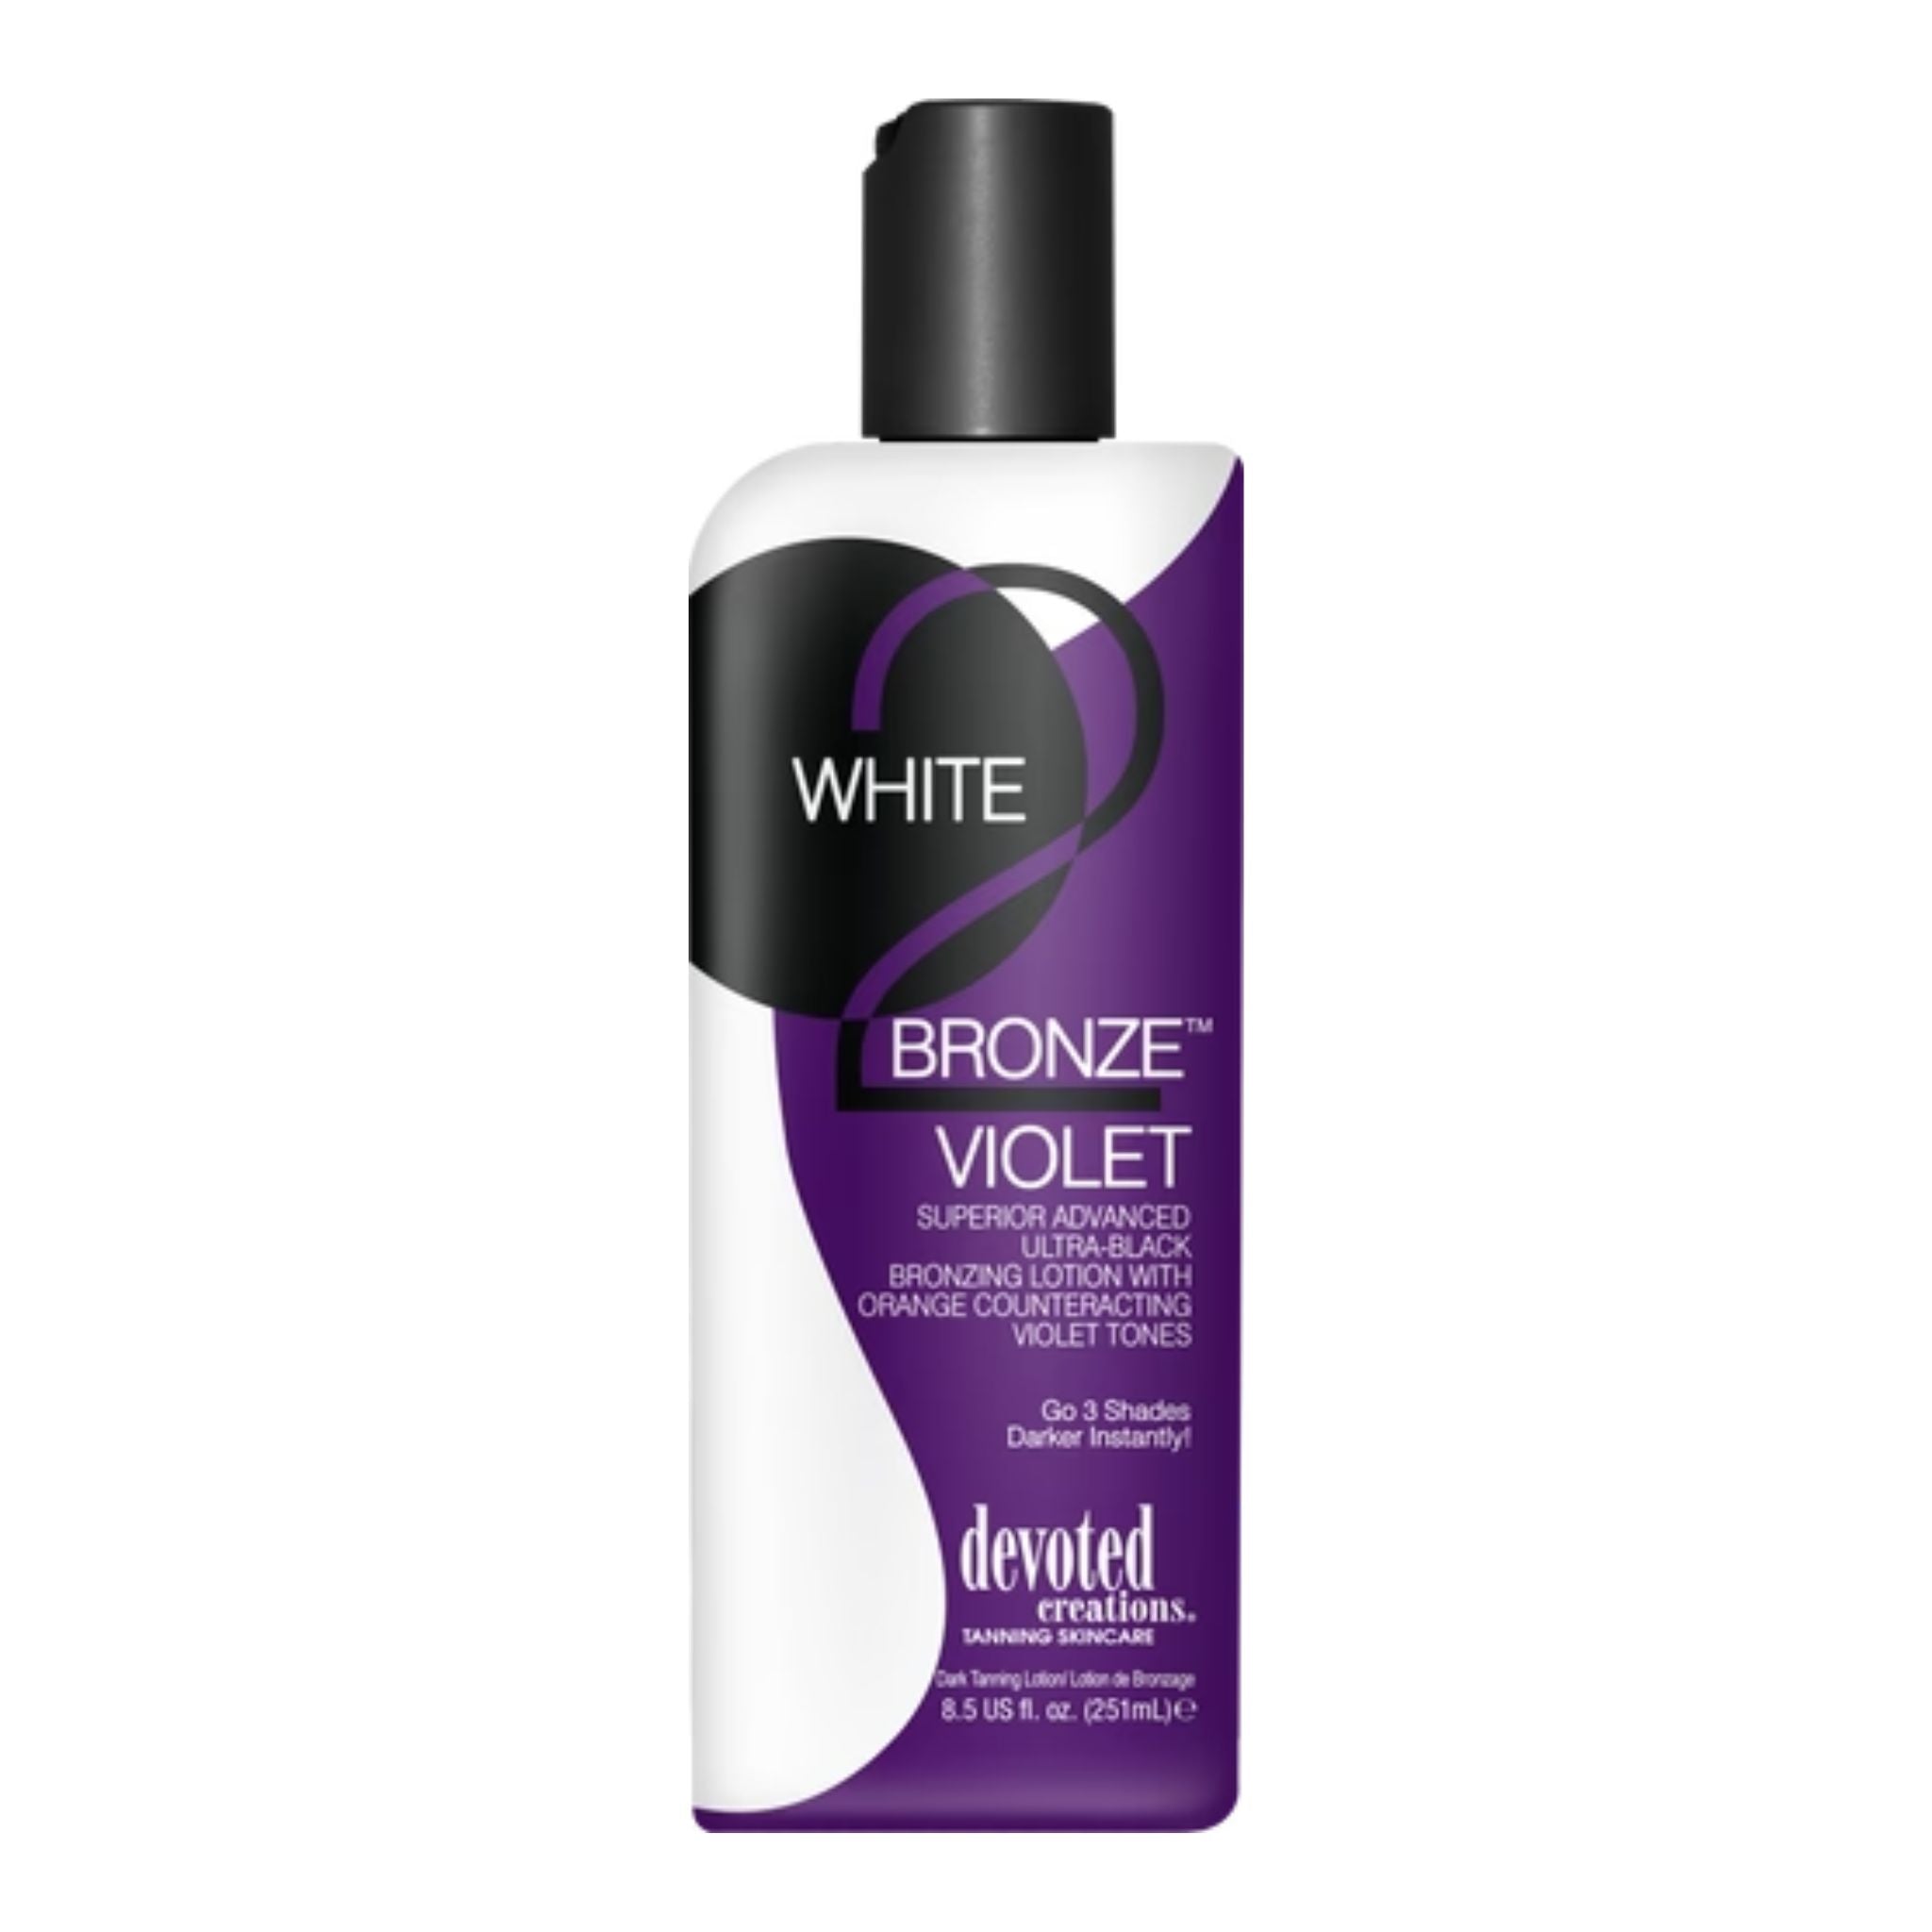 Devoted Creations White 2 Bronze Violet Ultra-Black Bronzing Lotion Tanning Lotion